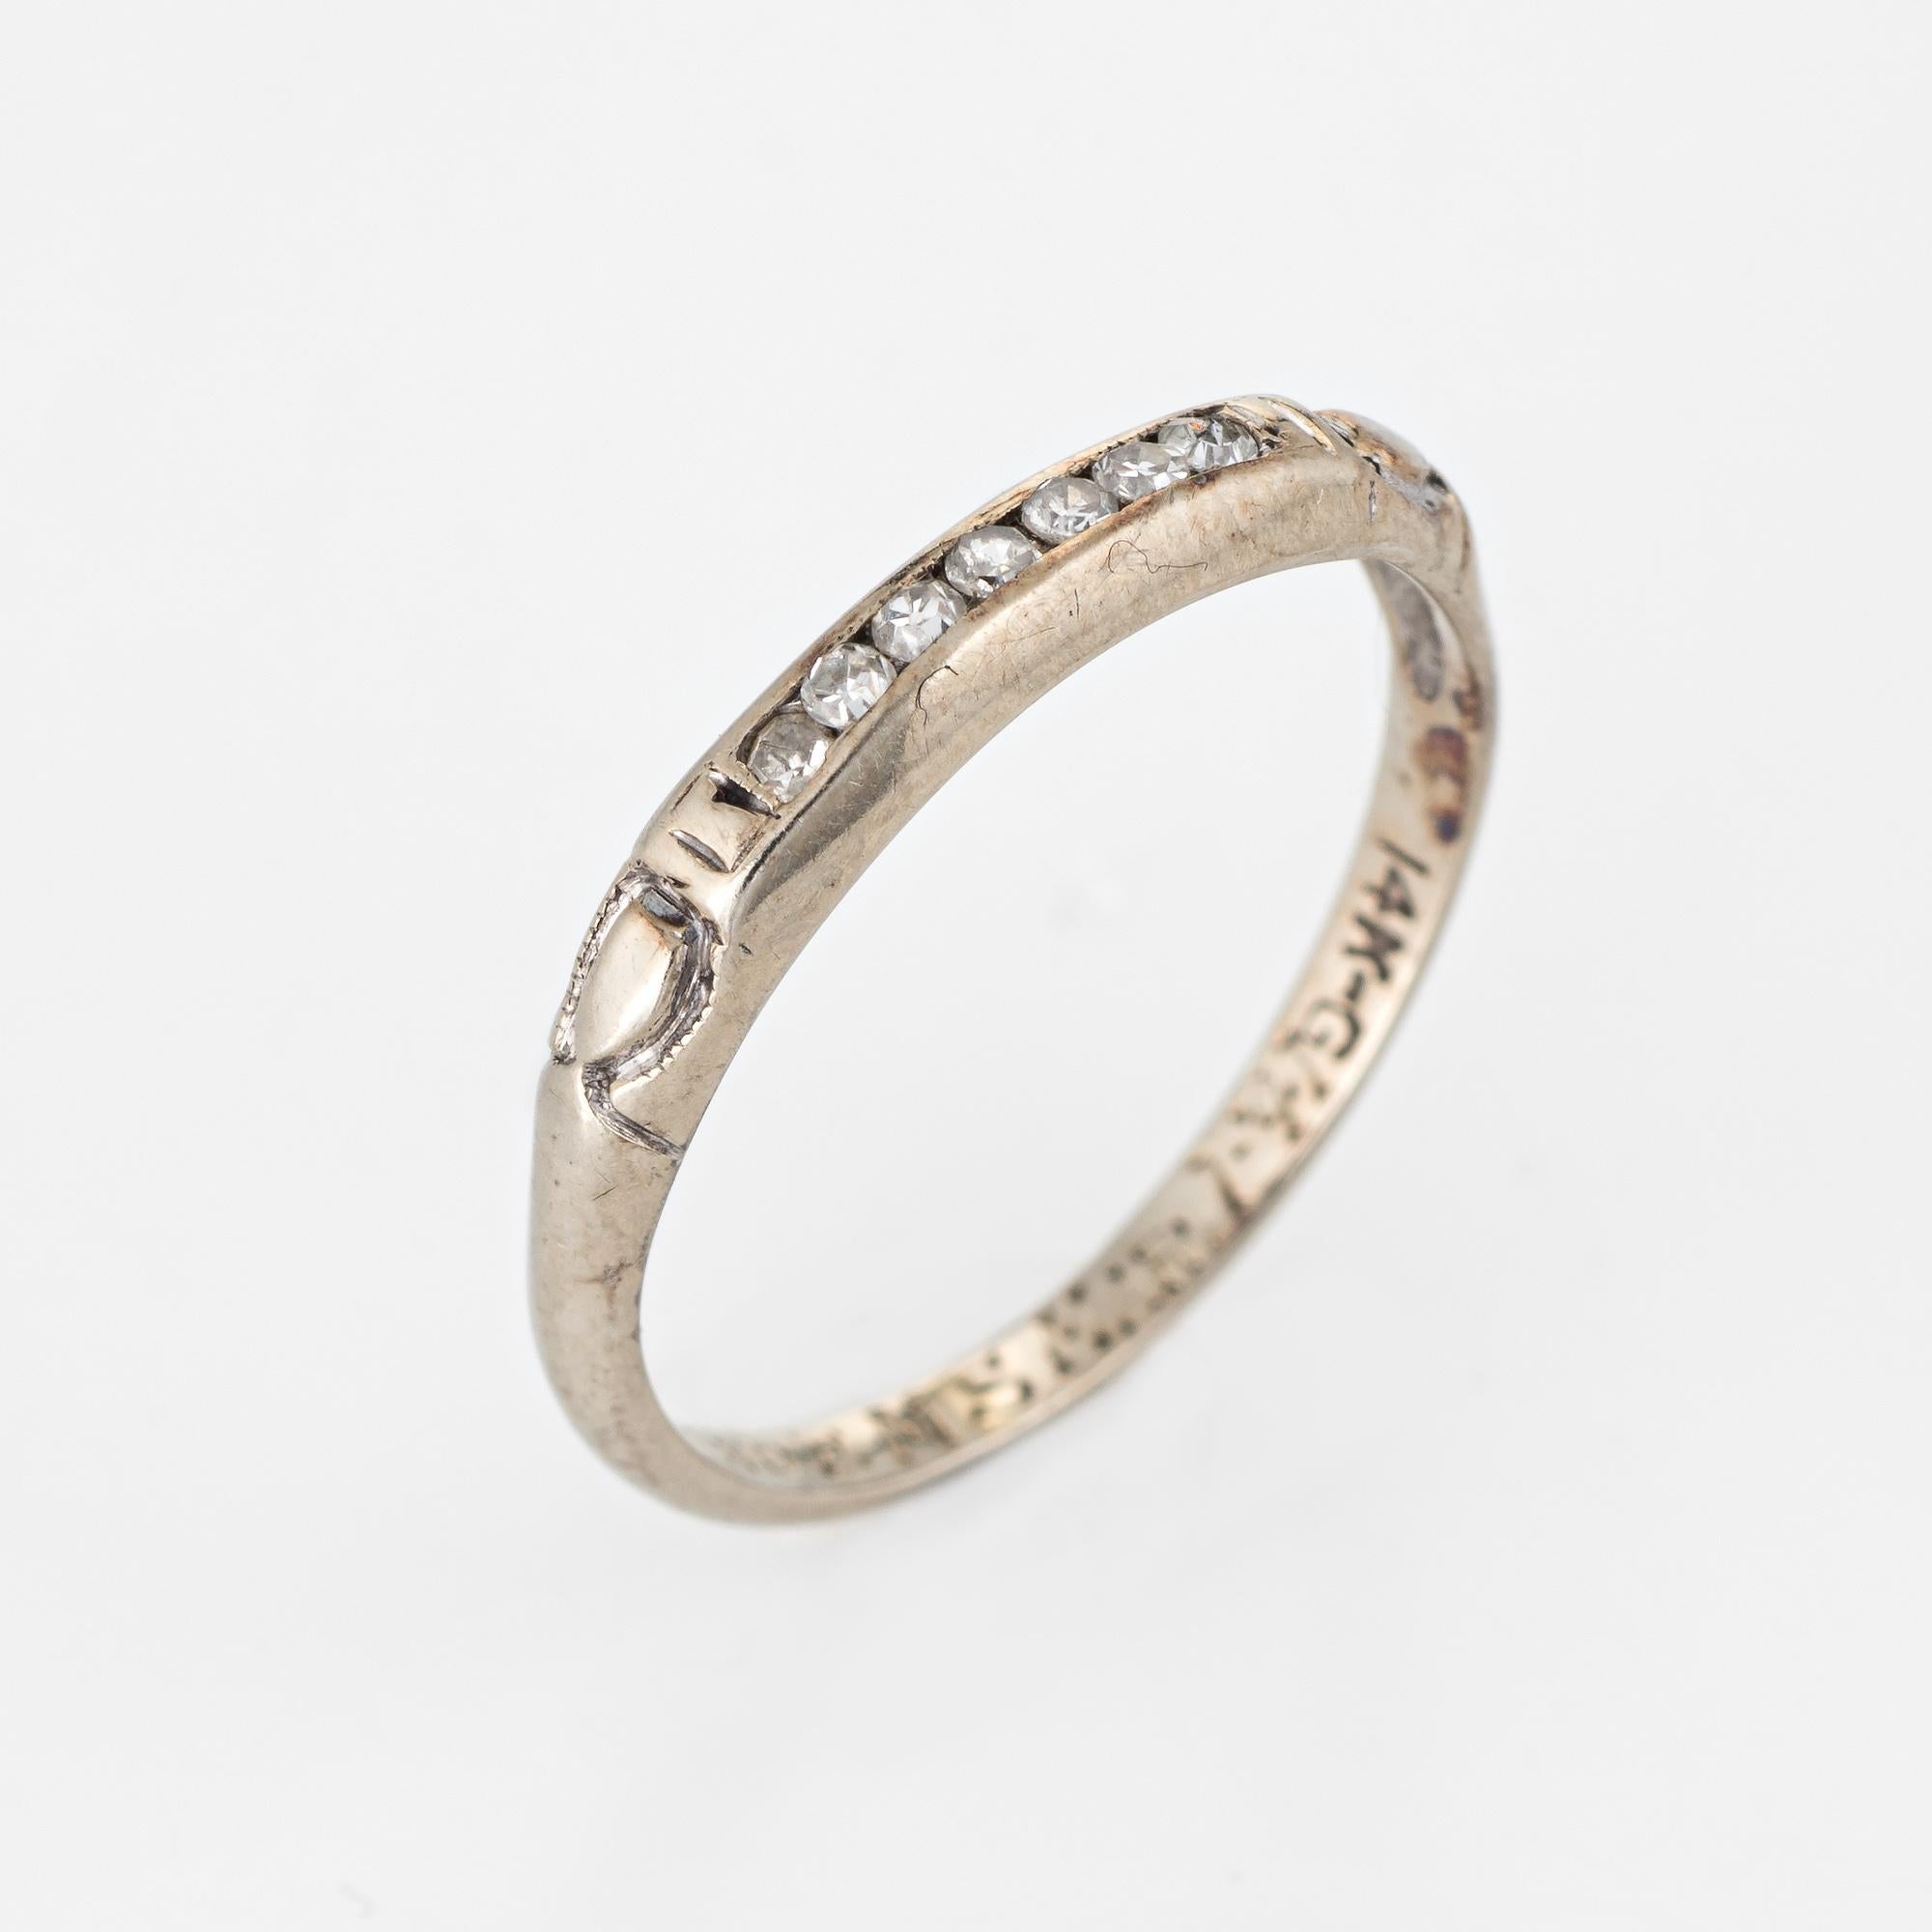 Elegant vintage diamond wedding band (circa 1941) crafted in 14 karat white gold. 

7 single cut diamonds are estimated at 0.01 carats each and total an estimated 0.07 carats. The diamonds are estimated at H-I color and VS2-SI1 clarity.

The ring